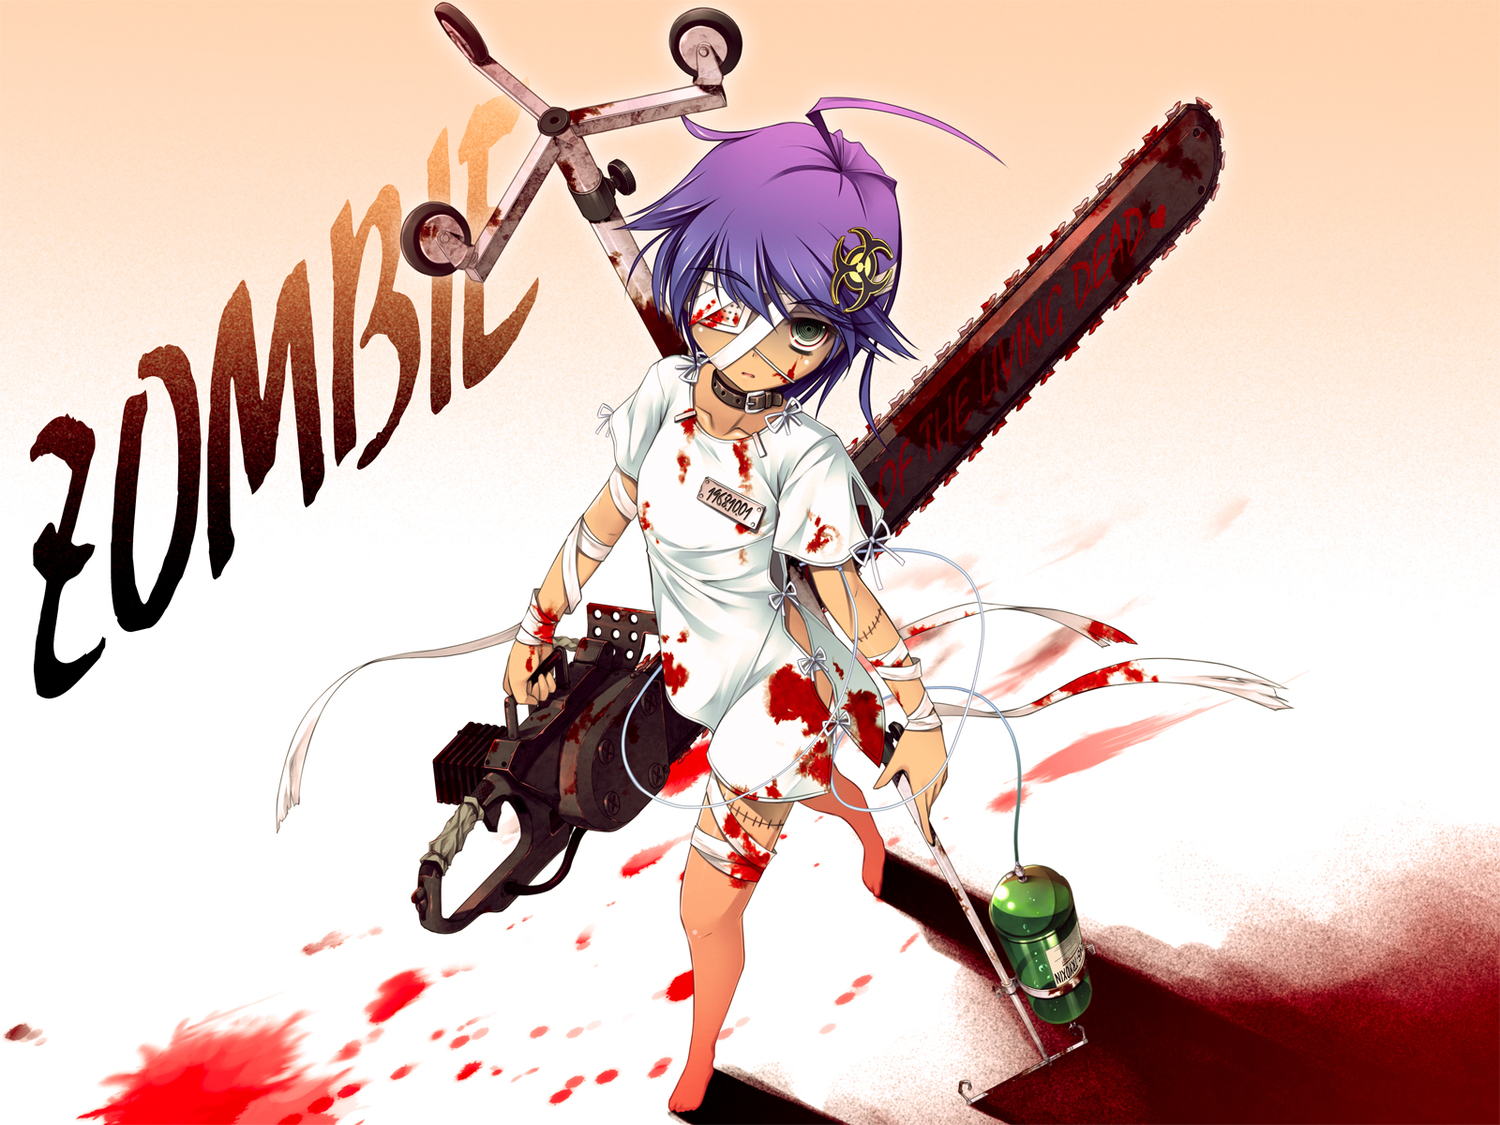 Wallpaper Of The Week Chainsaw Girl Randomness Thing